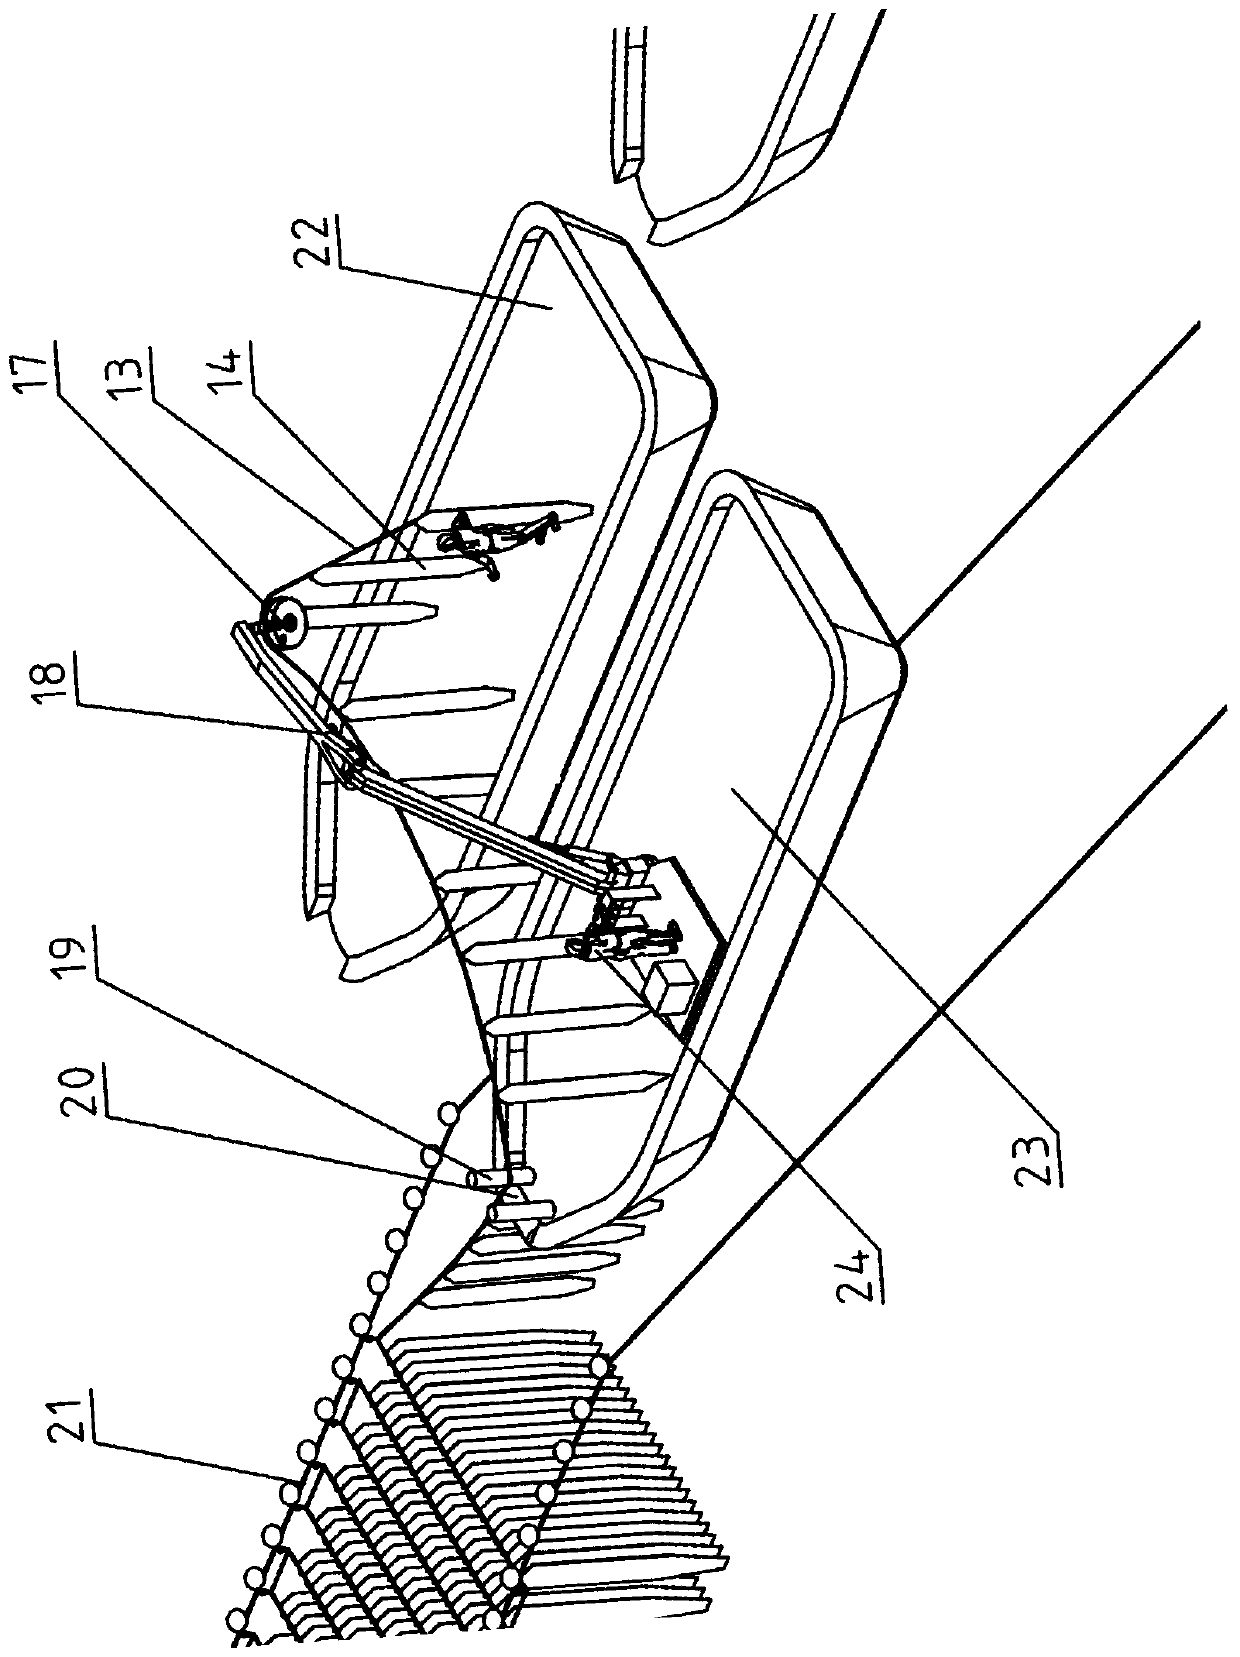 Rotary retractable claw-type raft frame seedling rope harvesting and transferring device and system